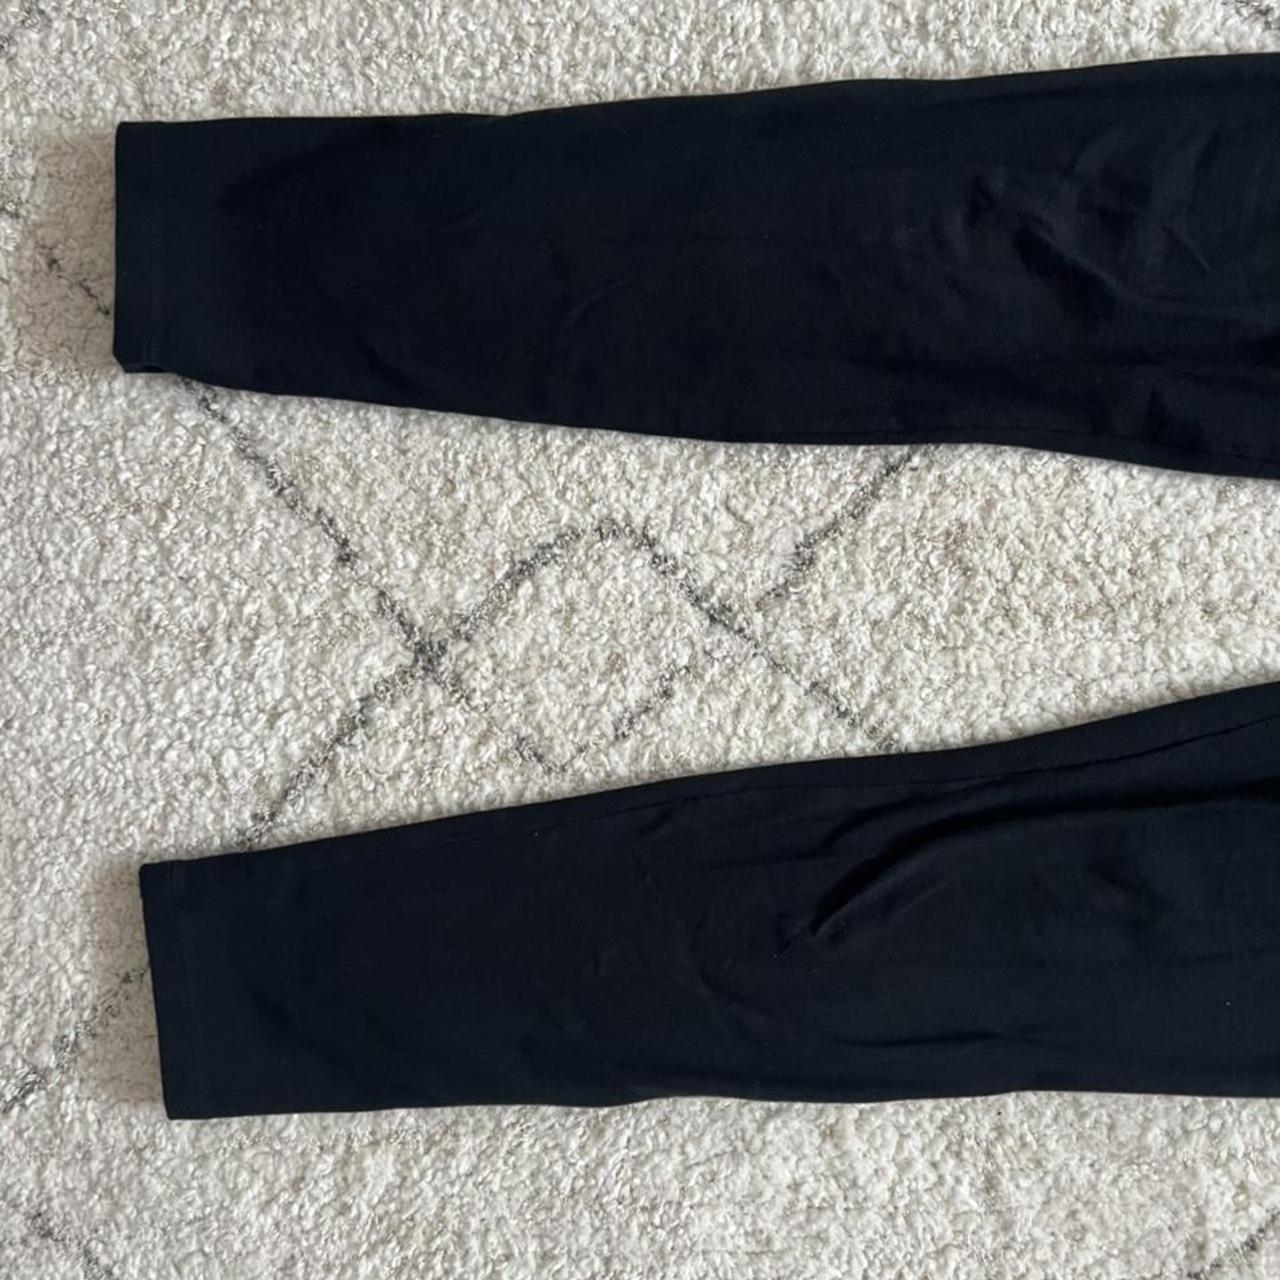 Product Image 4 - Causal black leggings
For Workout or